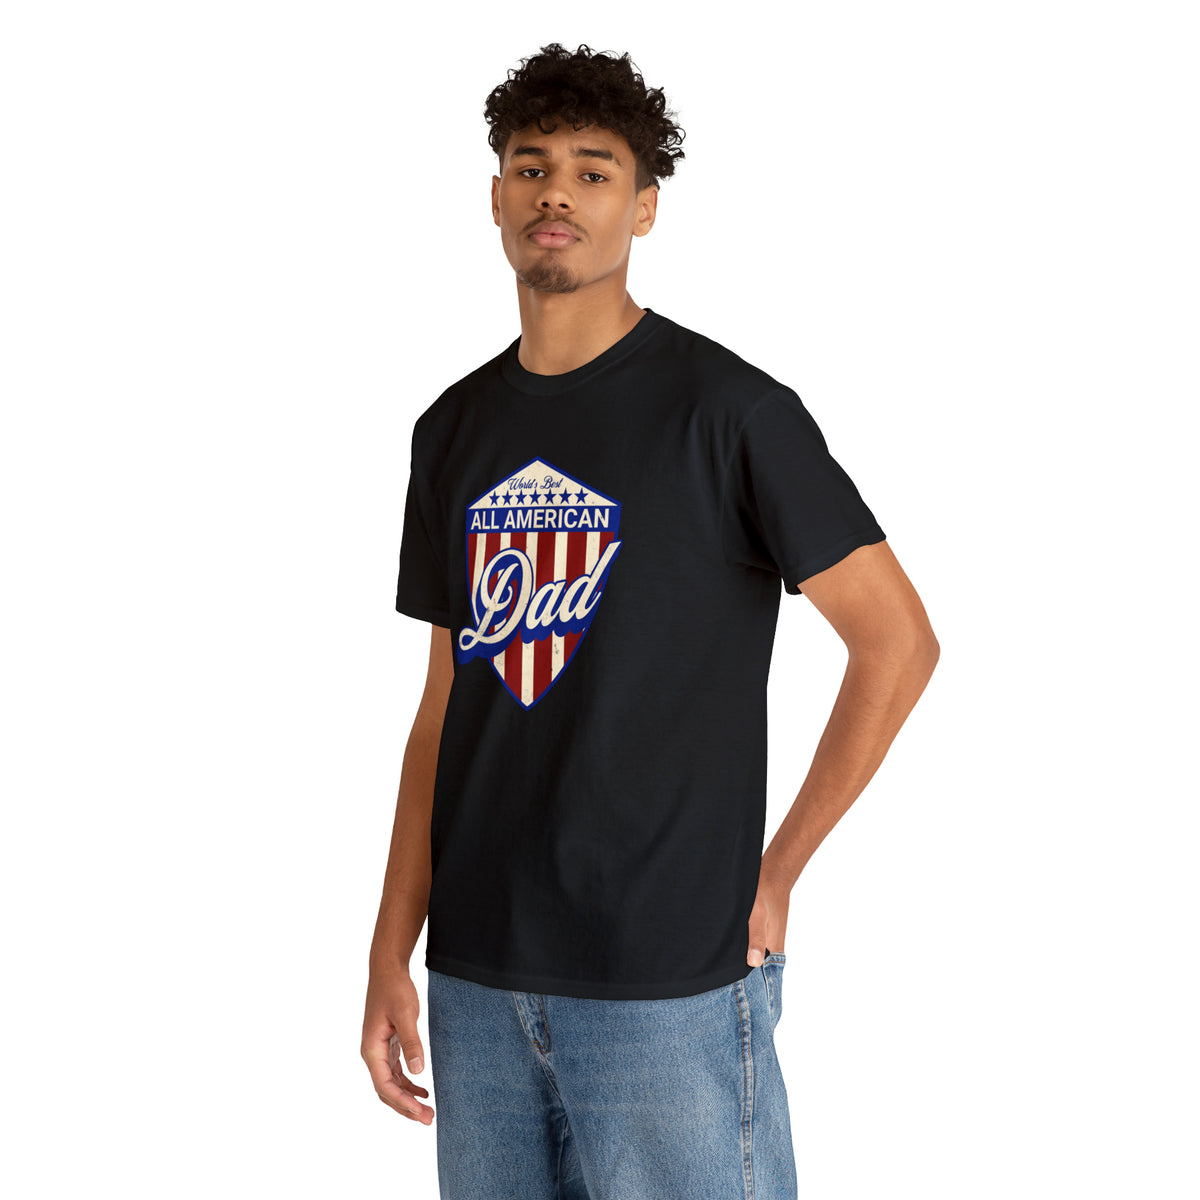 All American Dad T-Shirt